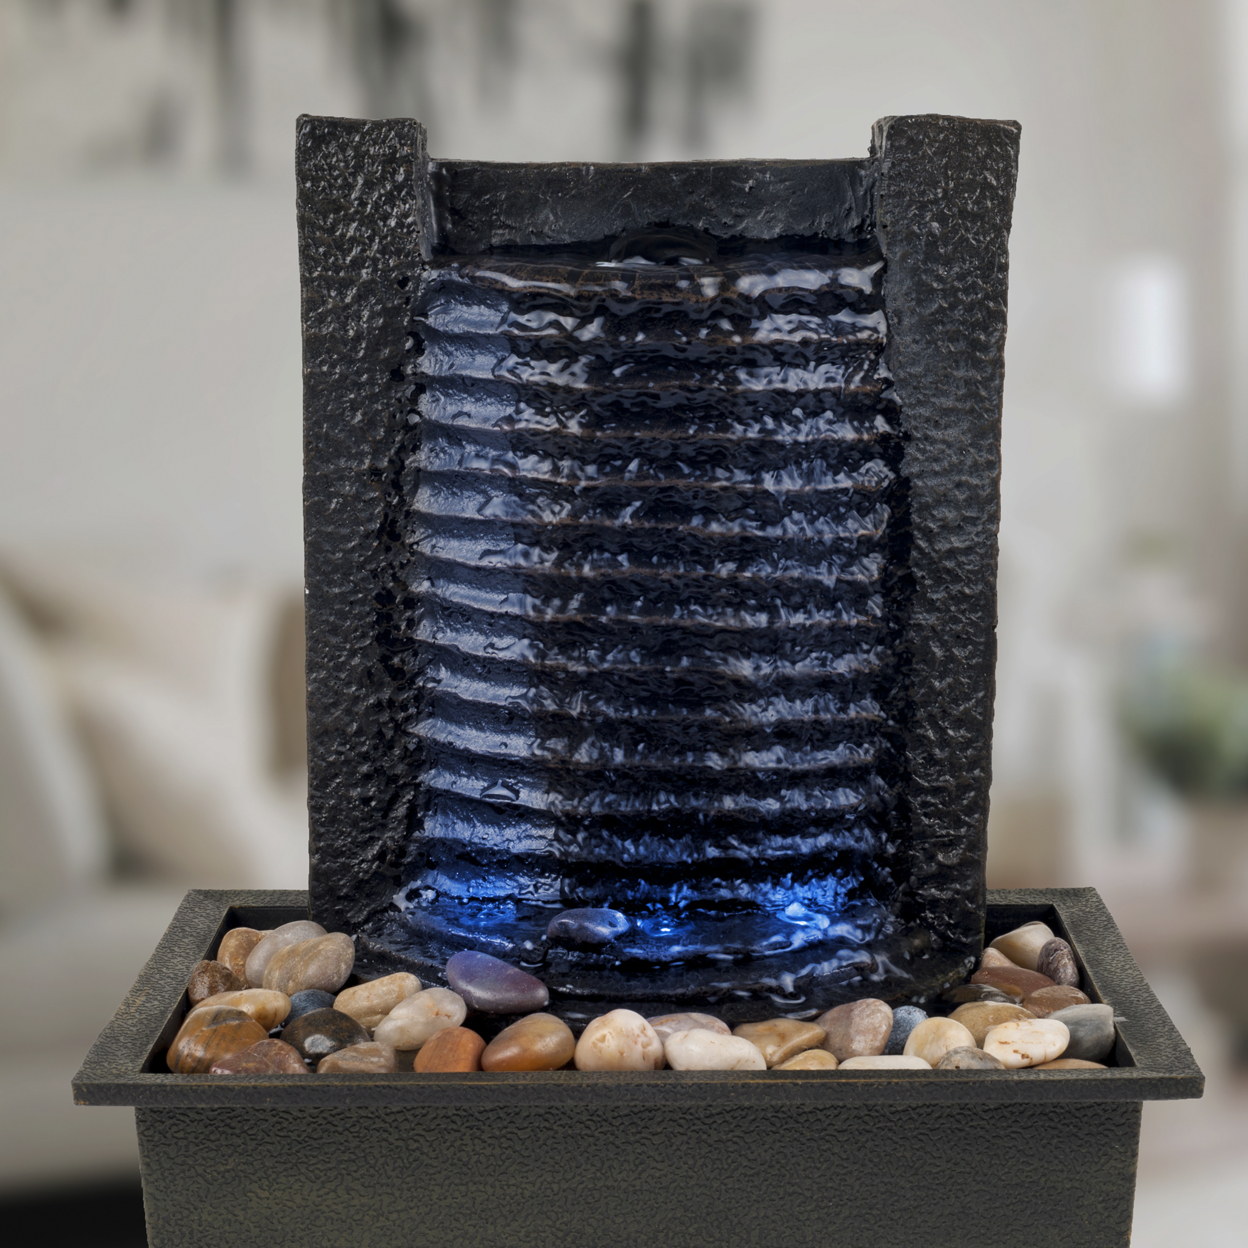 Indoor Water Fountain With LED Lights- Lighted Waterfall Tabletop Fountain With Stone Wall And Soothing Sound